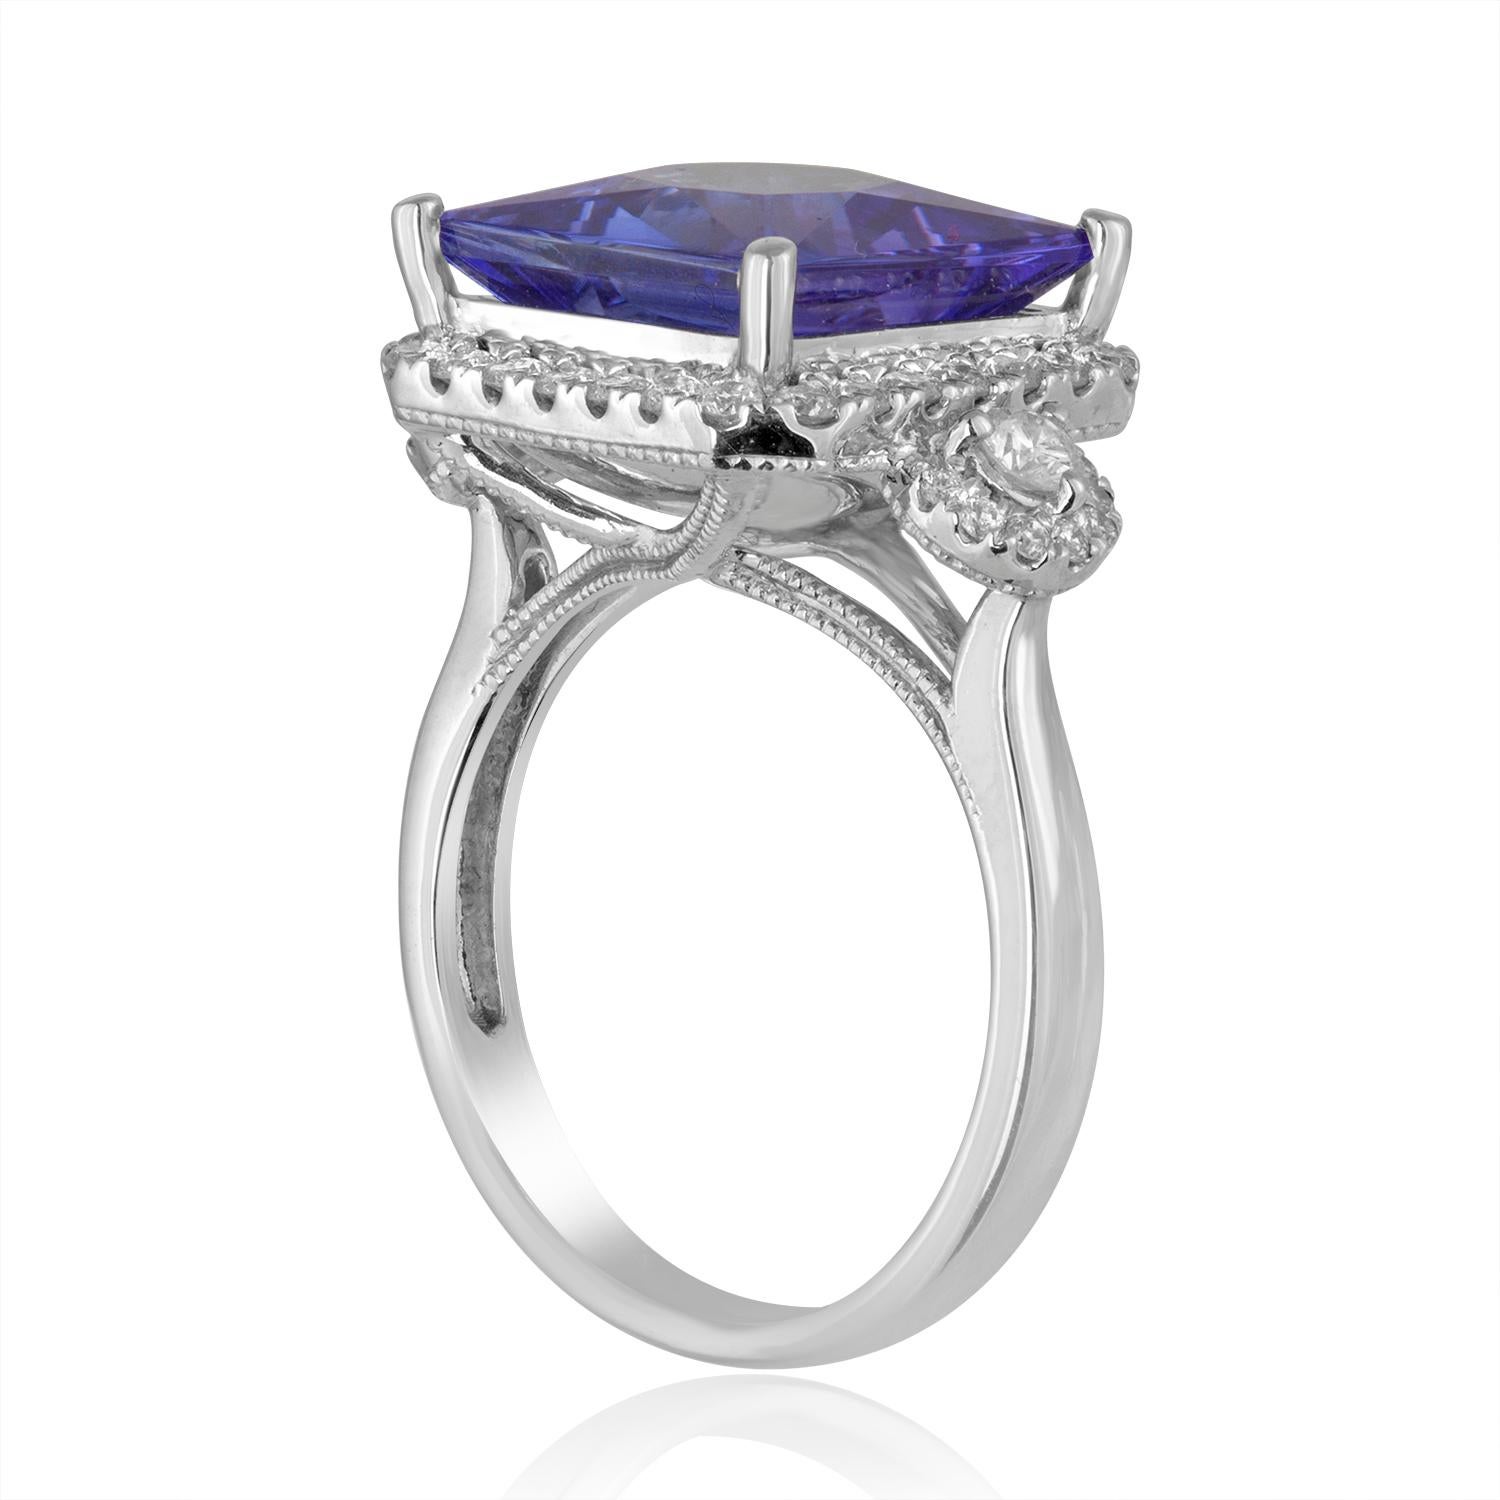 Beautiful Tanzanite Milgrain Ring
The ring is 18K White Gold
There are 0.75 Carats in Diamonds F/G VS/SI
The Tanzanite is Princess Cut 5.68 Carats
The stone with the halo measures 0.50